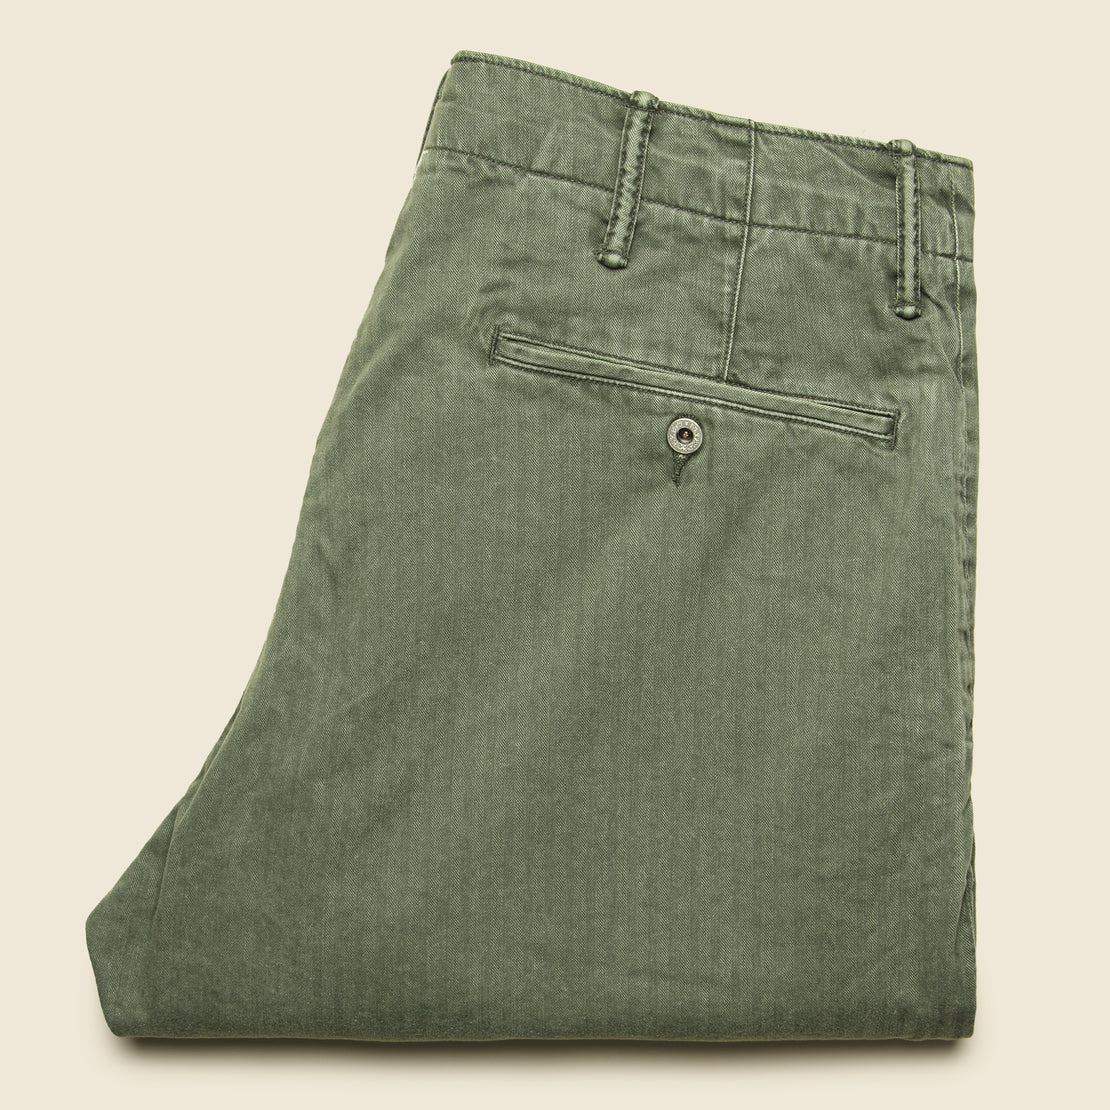 Cotton Field Chino - Dark Olive - RRL - STAG Provisions - Pants - Twill